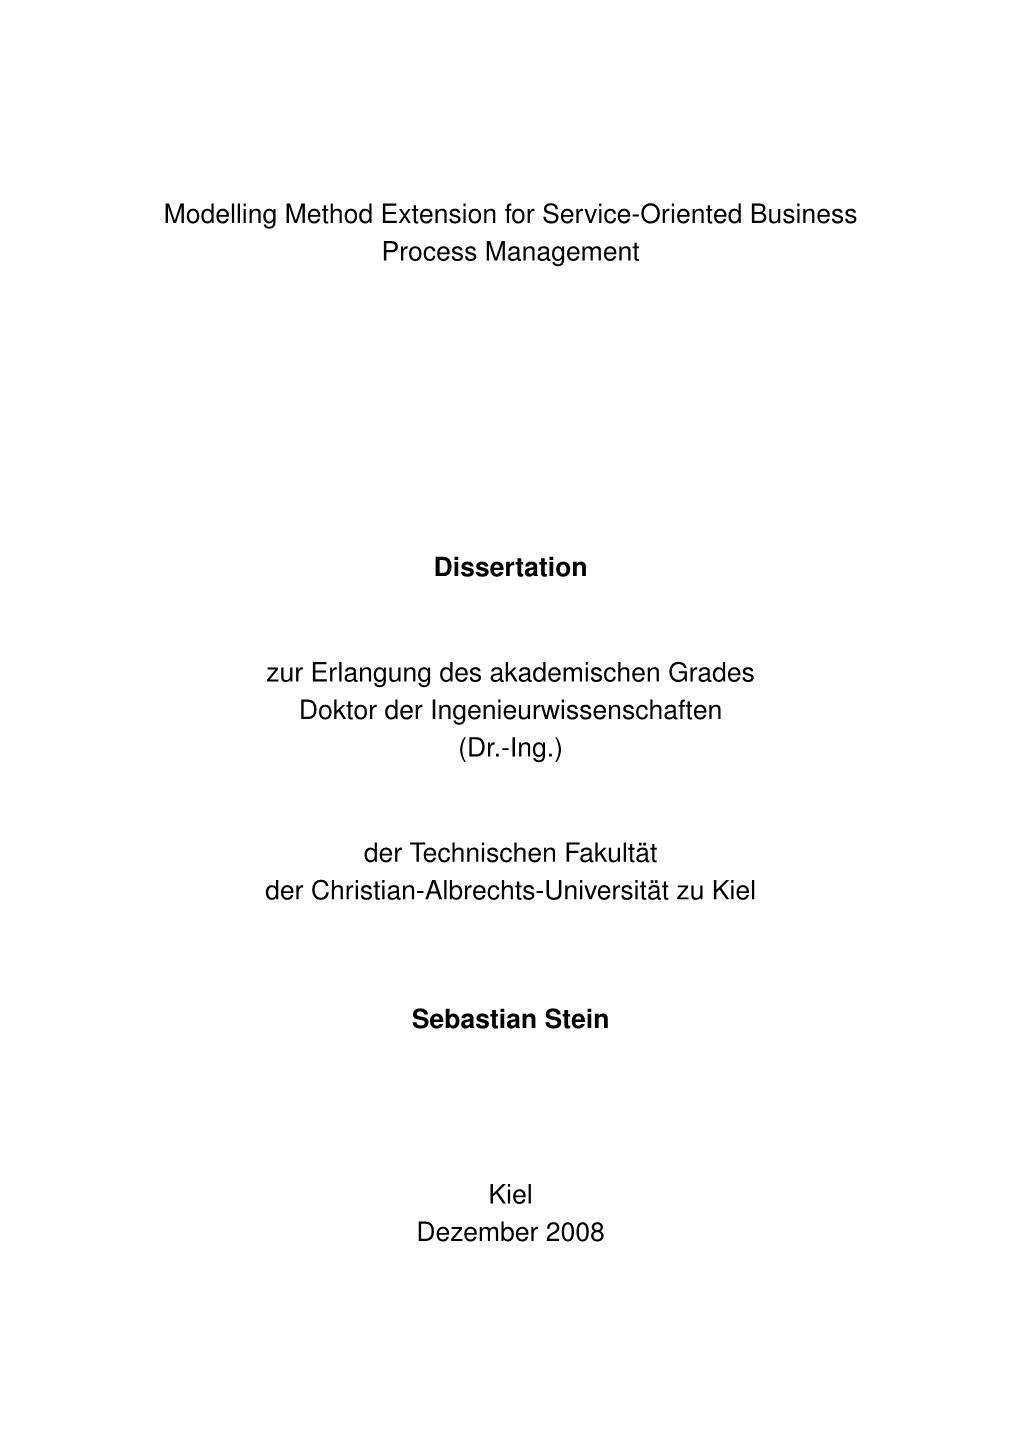 Modelling Method Extension for Service-Oriented Business Process Management